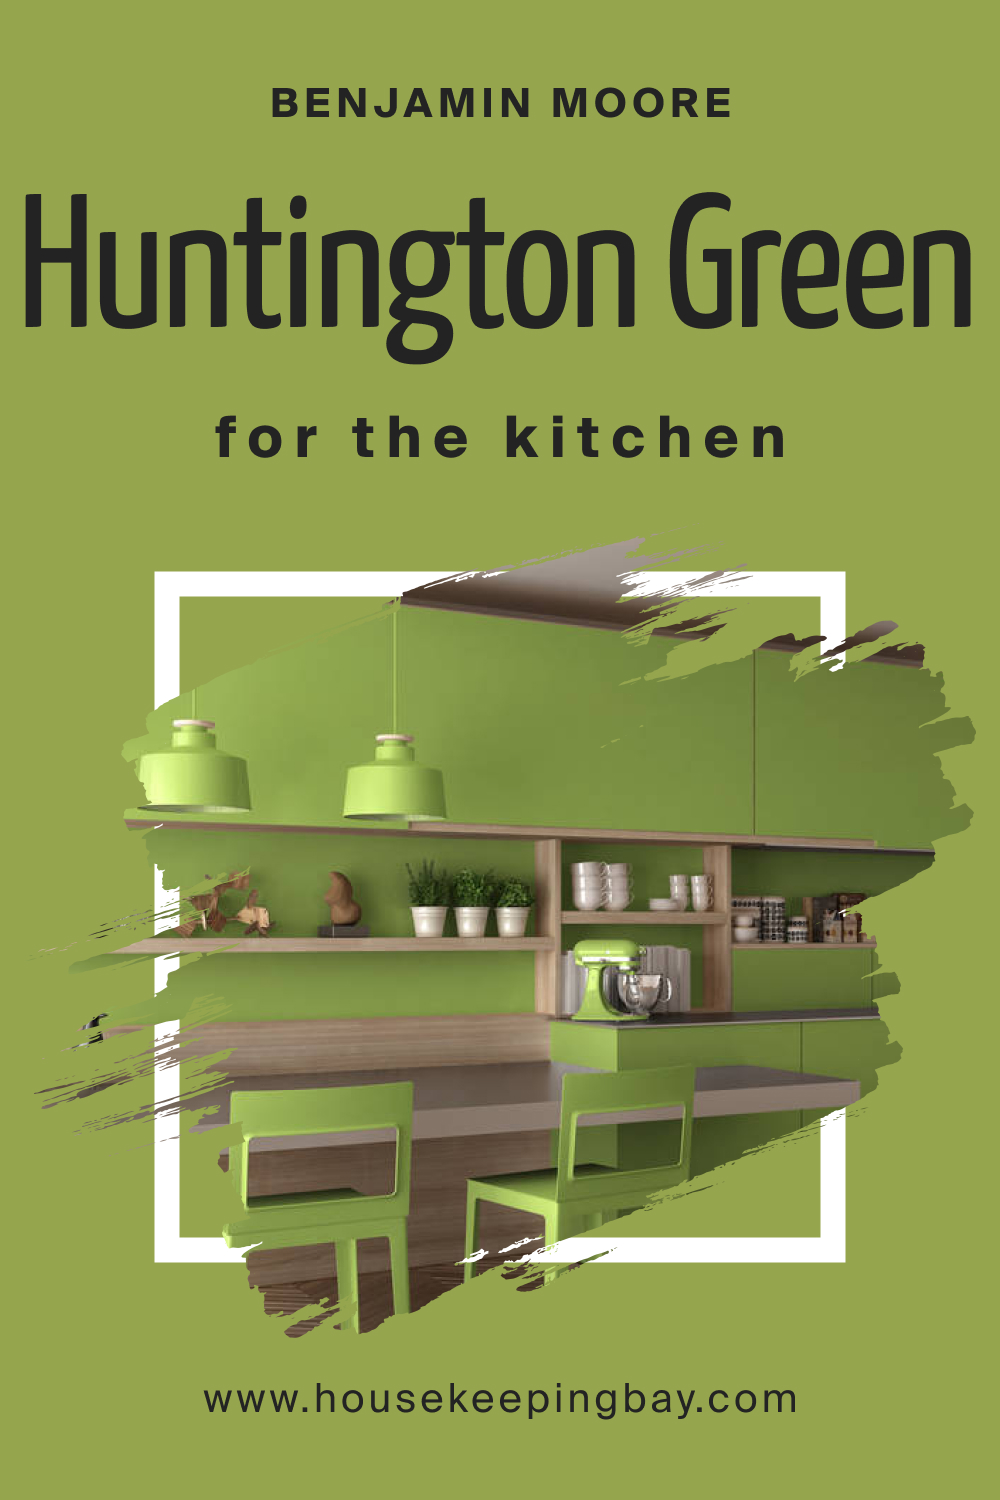 How to Use Huntington Green 406 in the Kitchen?